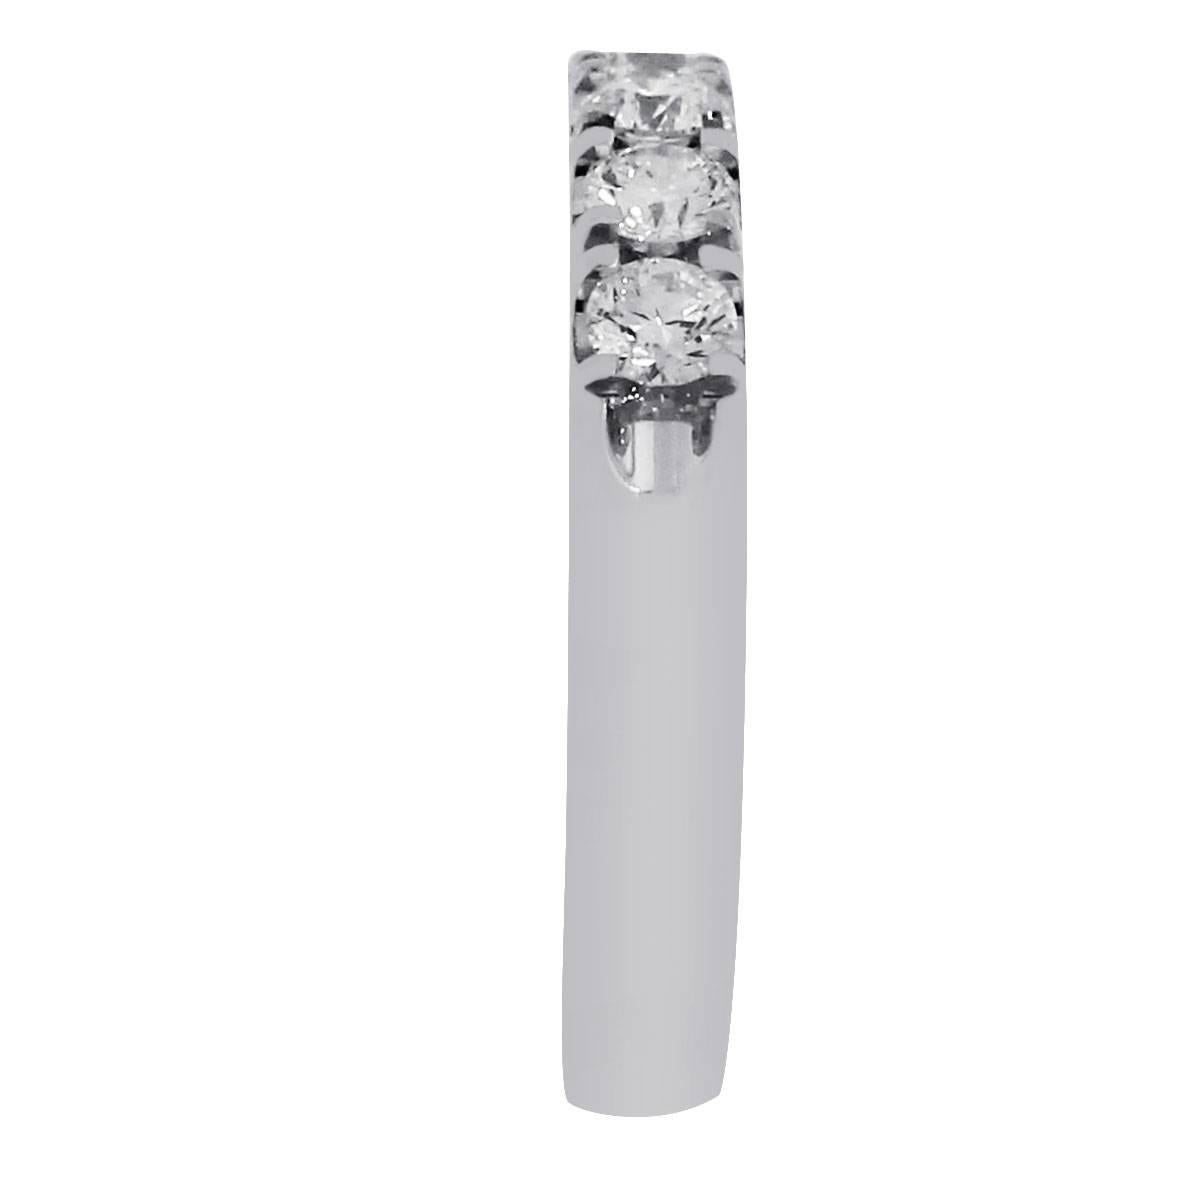 Material: 14k white gold
Diamond Details: Approximately 0.60ctw of round brilliant diamonds. Diamonds are H/J in color and SI1 in clarity
Ring Size: 6
Ring Measurements: 0.90″ x 0.10″ x 0.90″
Total Weight: 4.5g (2.8dwt)
SKU: G7010